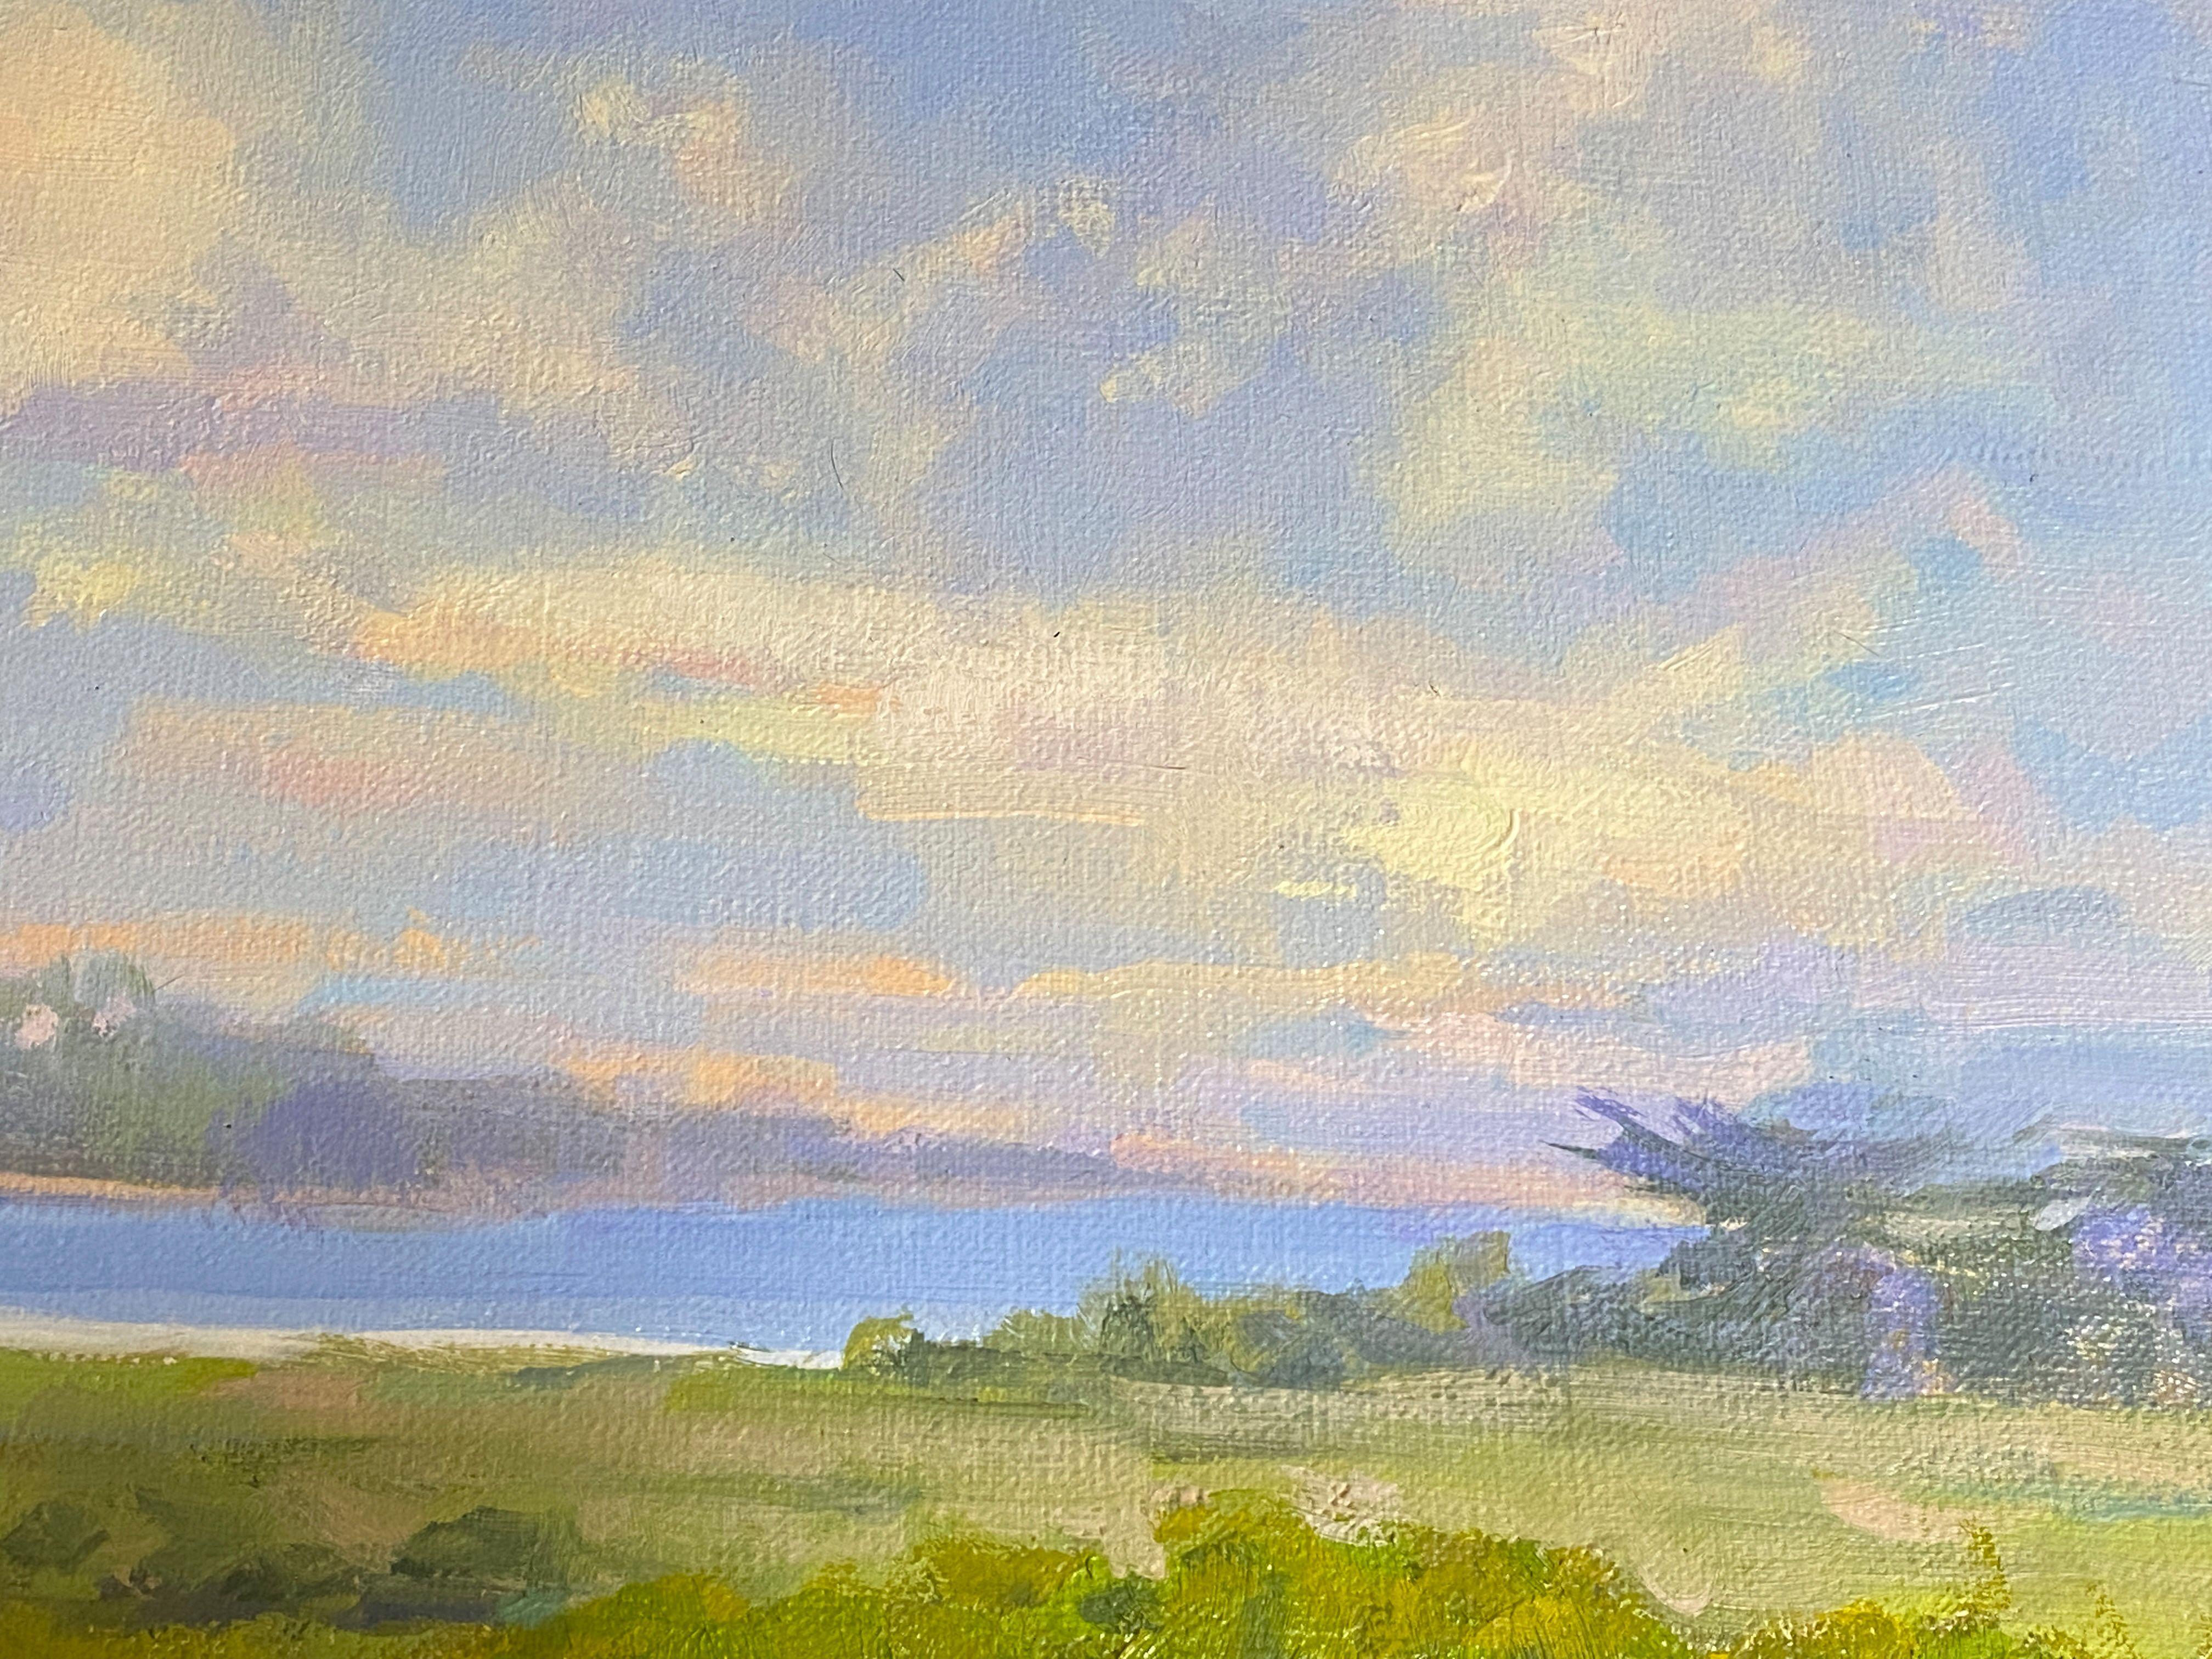 Mission Ranch Pasture With a View, Painting, Oil on Canvas 1